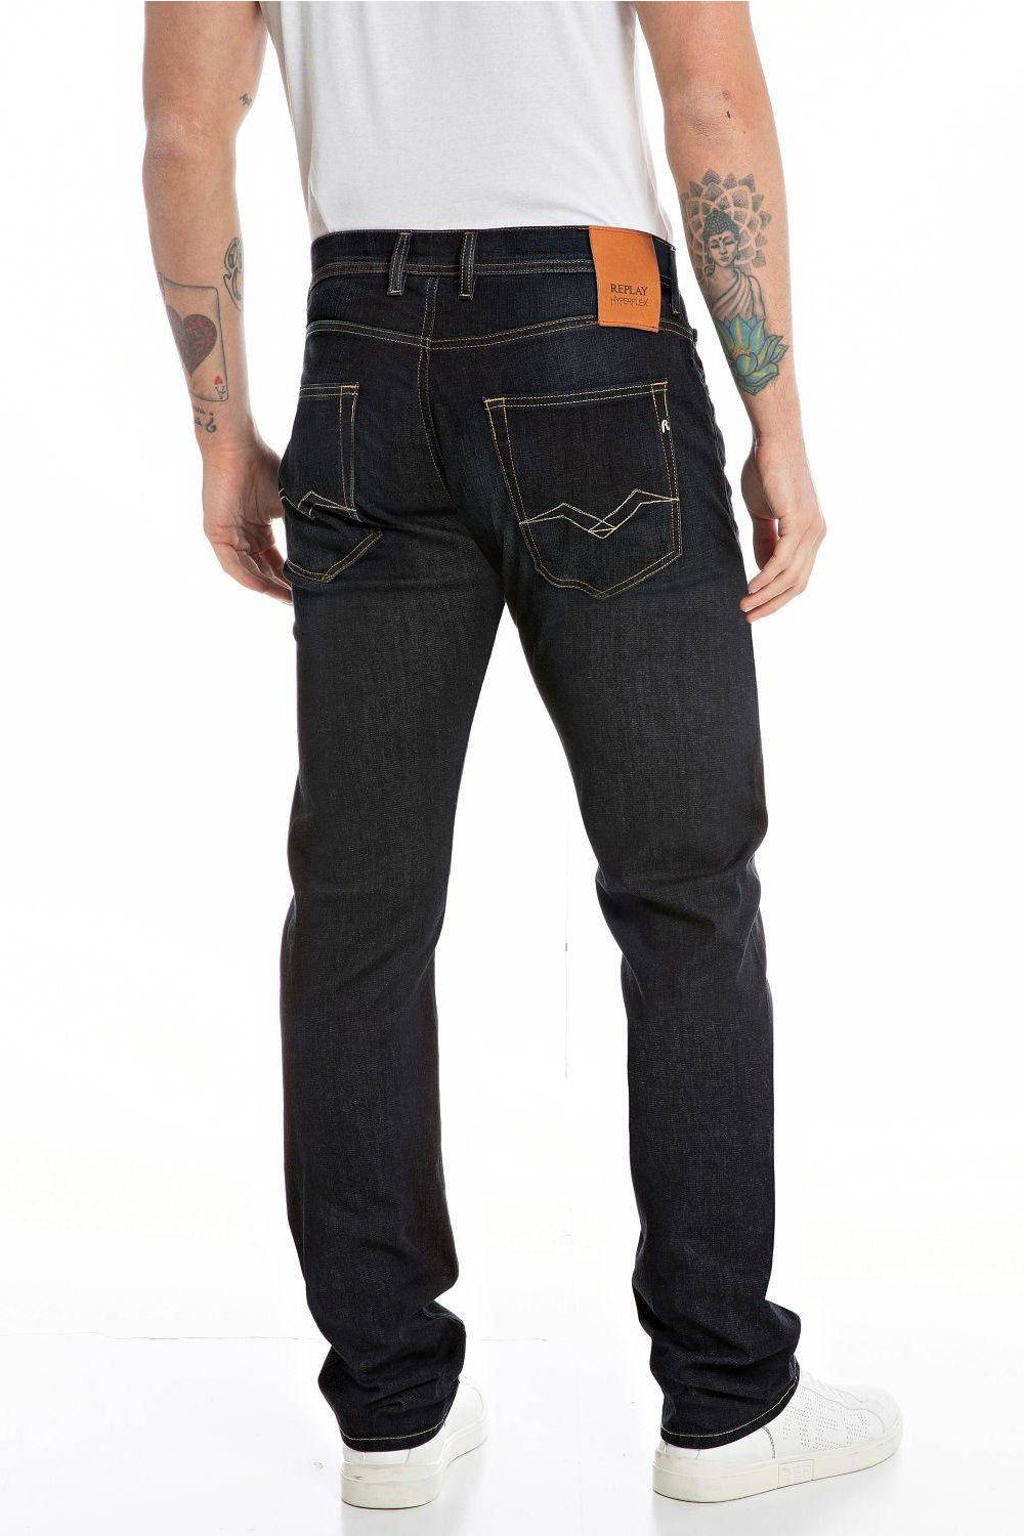 REPLAY straight fit jeans GROVER dark blue | wehkamp